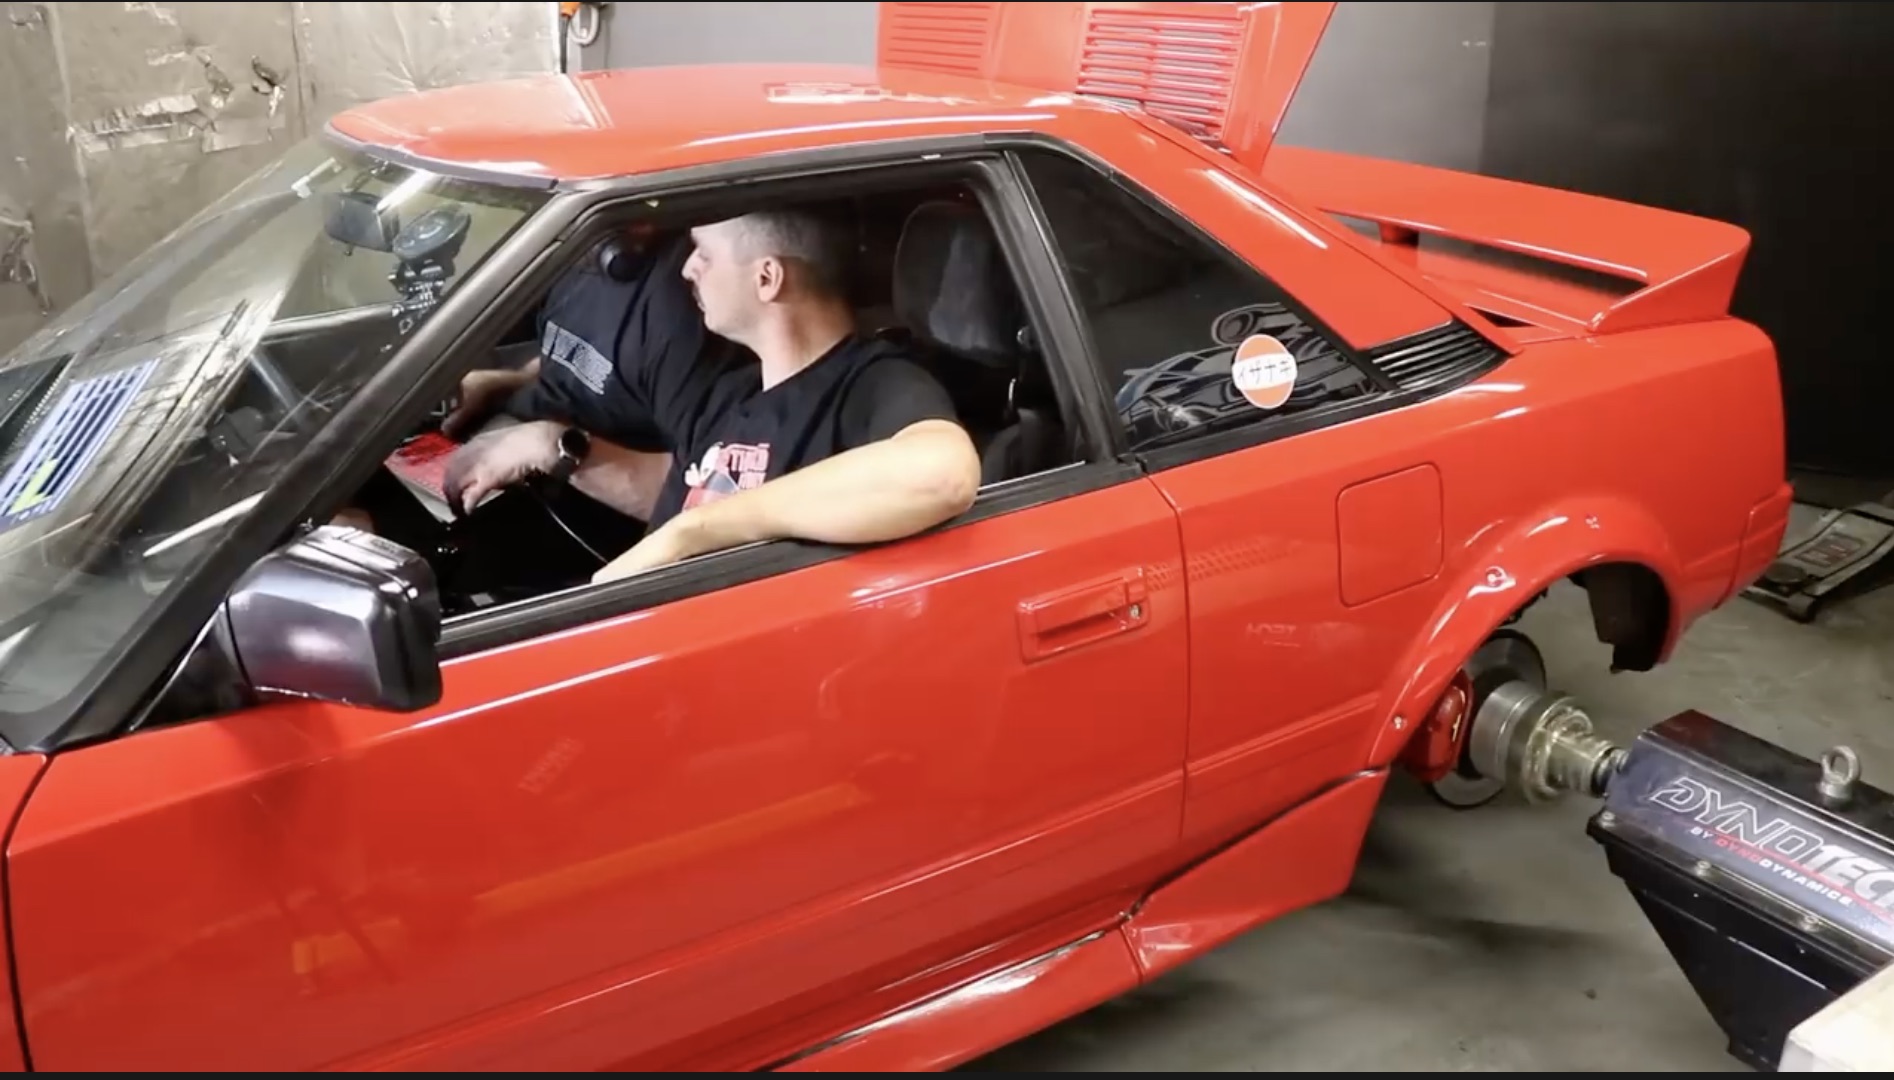 It’s Dyno Time For The Skid Factory’s MR2! How Does The Fresh Four-Banger Do On The Hub Dyno?